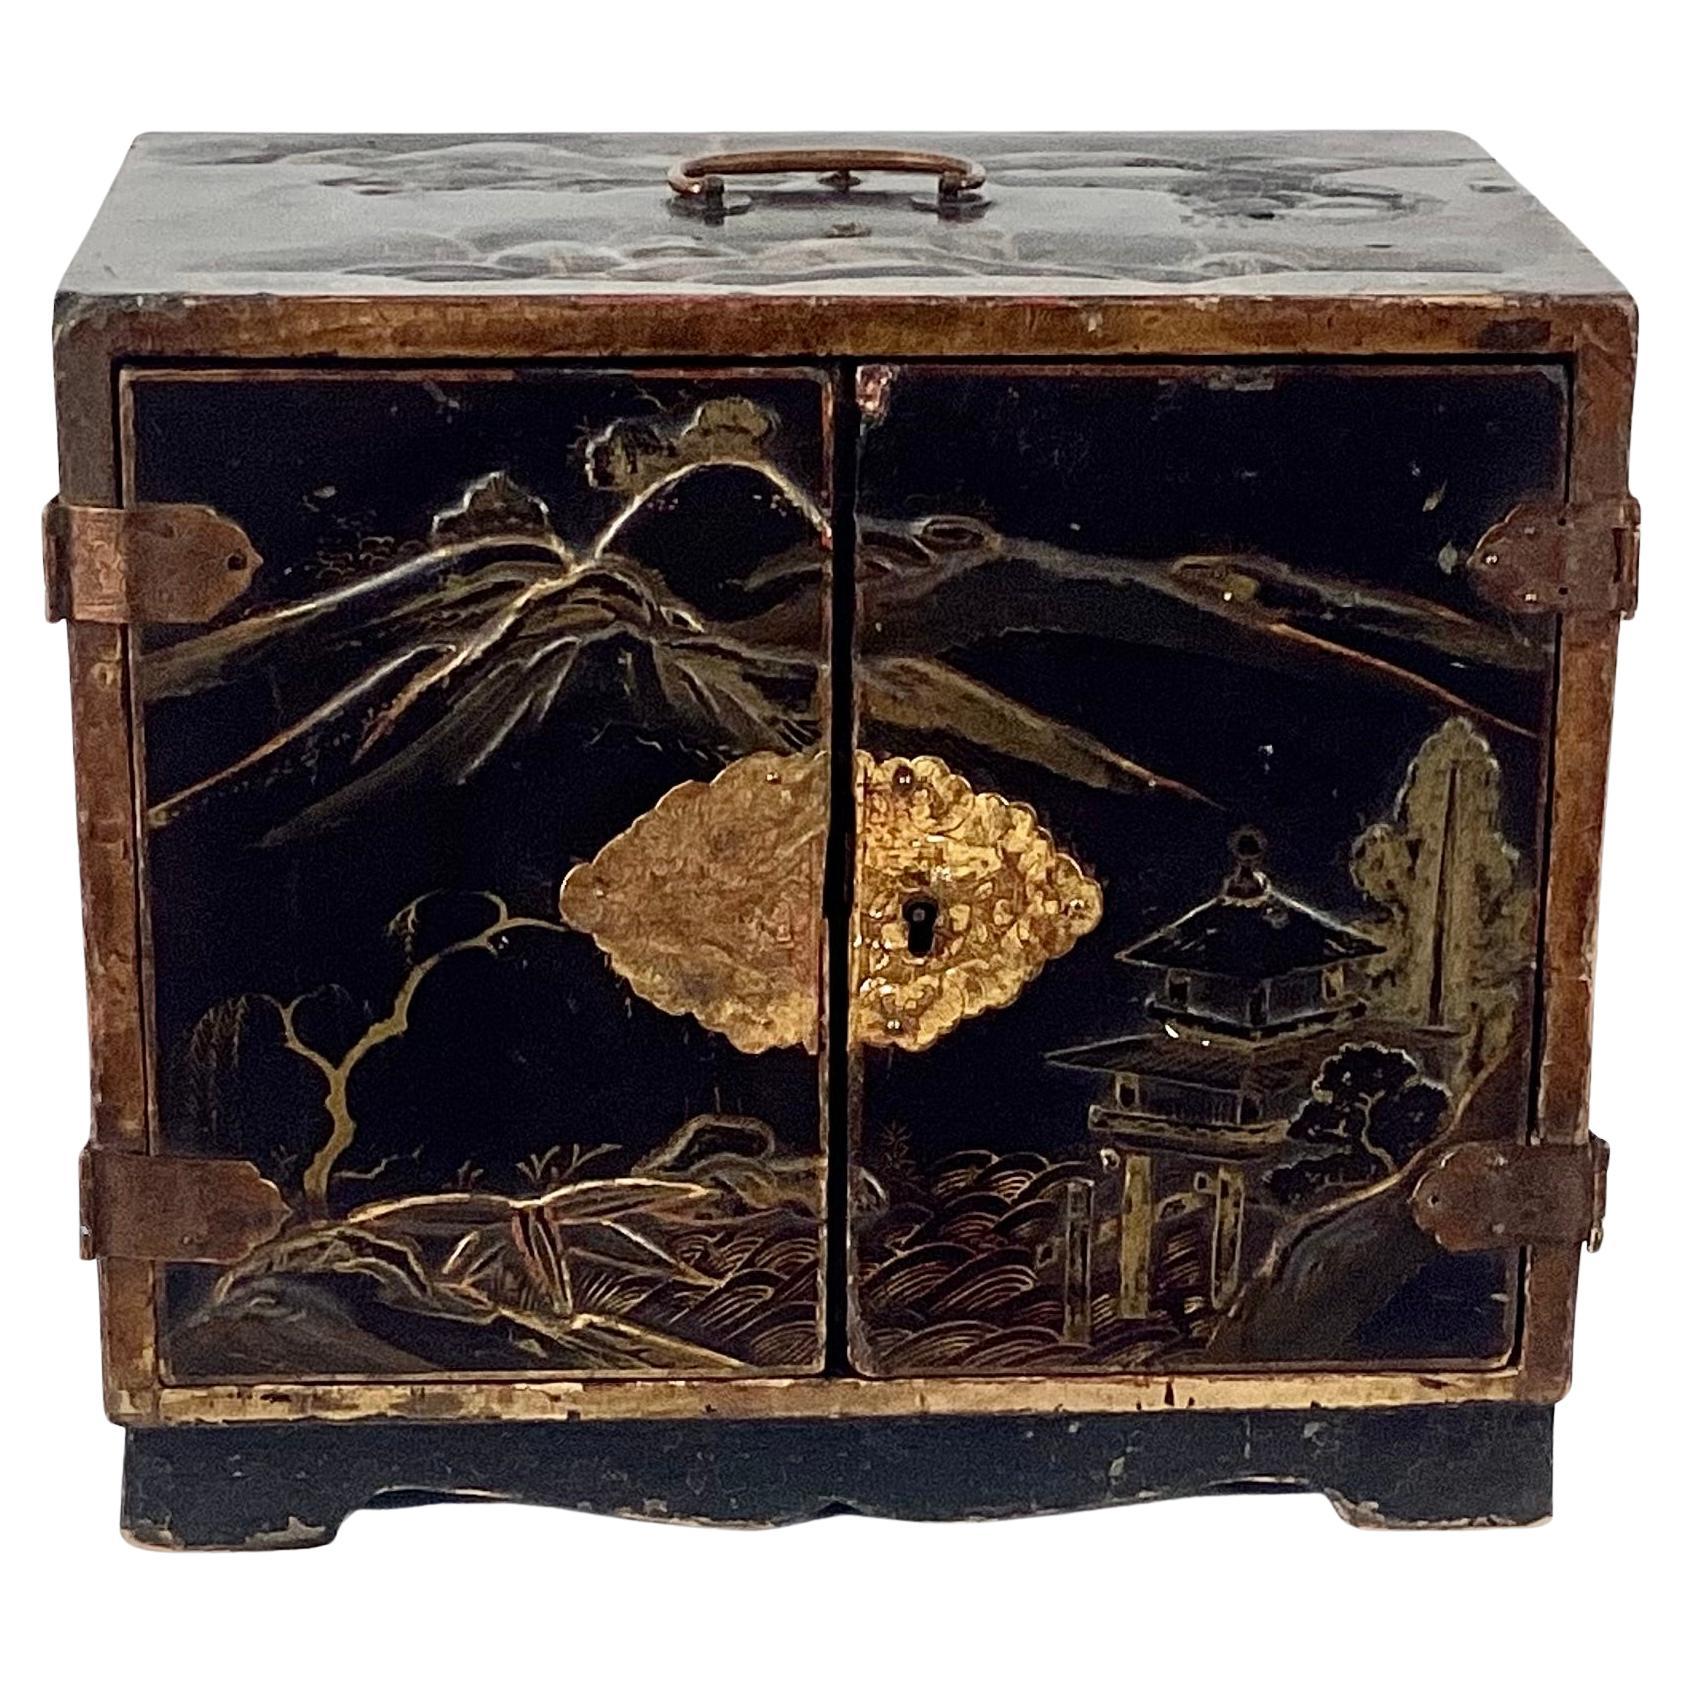 19th century Japanese chinoiserie painted gold lacquer. chest with brass handle. Chest depicts Japanese countryside and mountains in raised chinoiserie design. Twin front doors open to four decorated drawers, perfect for holding jewelry and other